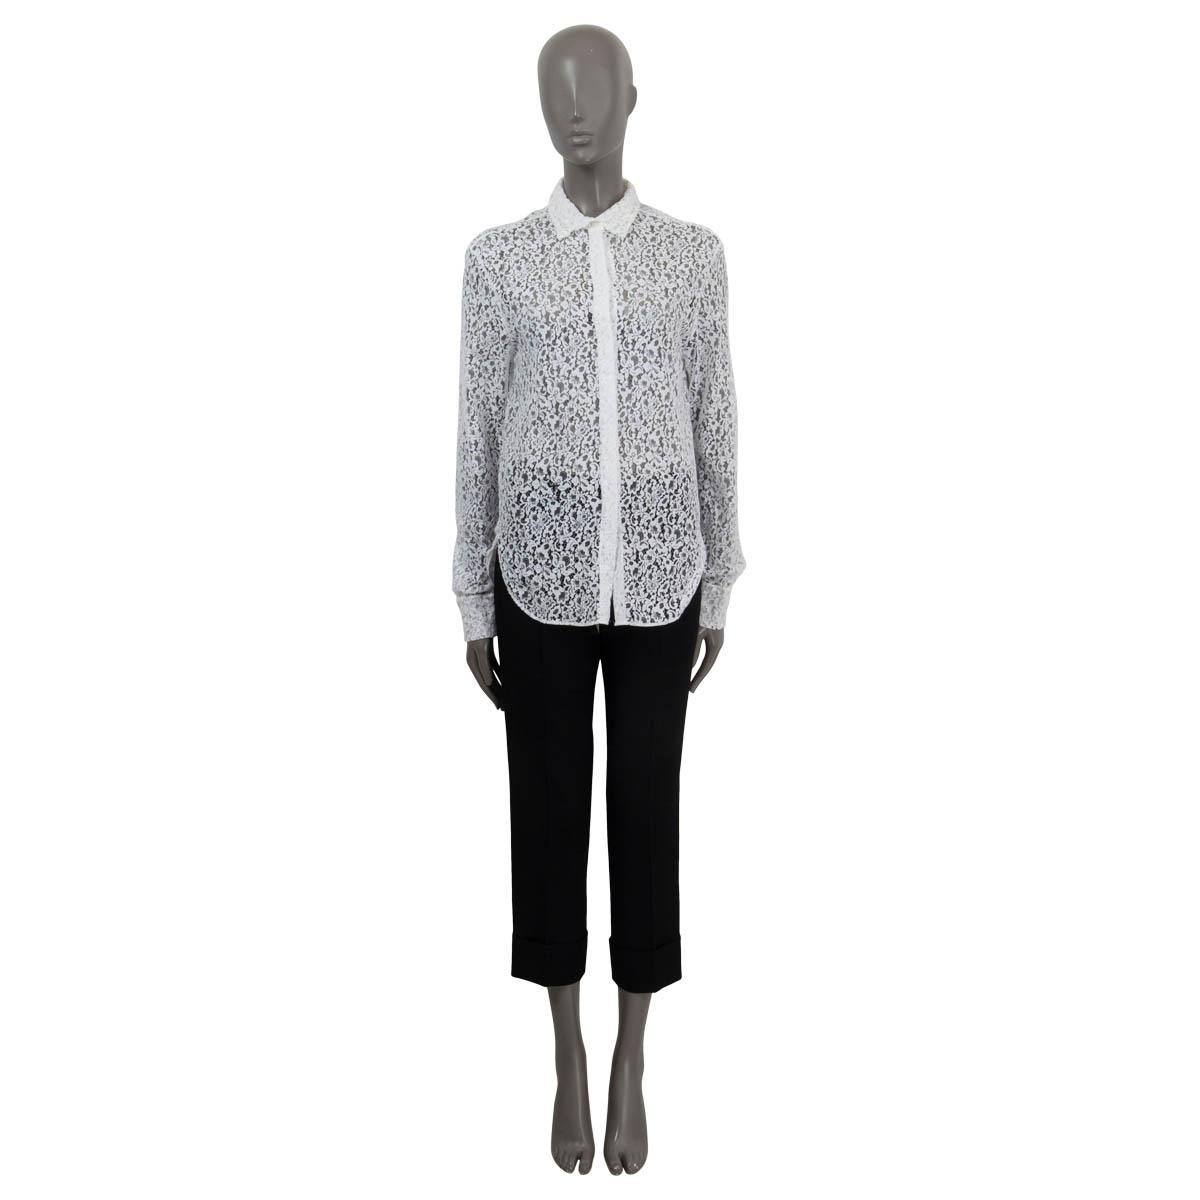 100% authentic Christian Dior semi sheer lace shirt in white cotton (77%) and polyamide (23%). Features long sleeves, buttoned cuffs and the 'CD' logo on the front. Opens with seven buttons on the front. Unlined. Has been worn and is in excellent